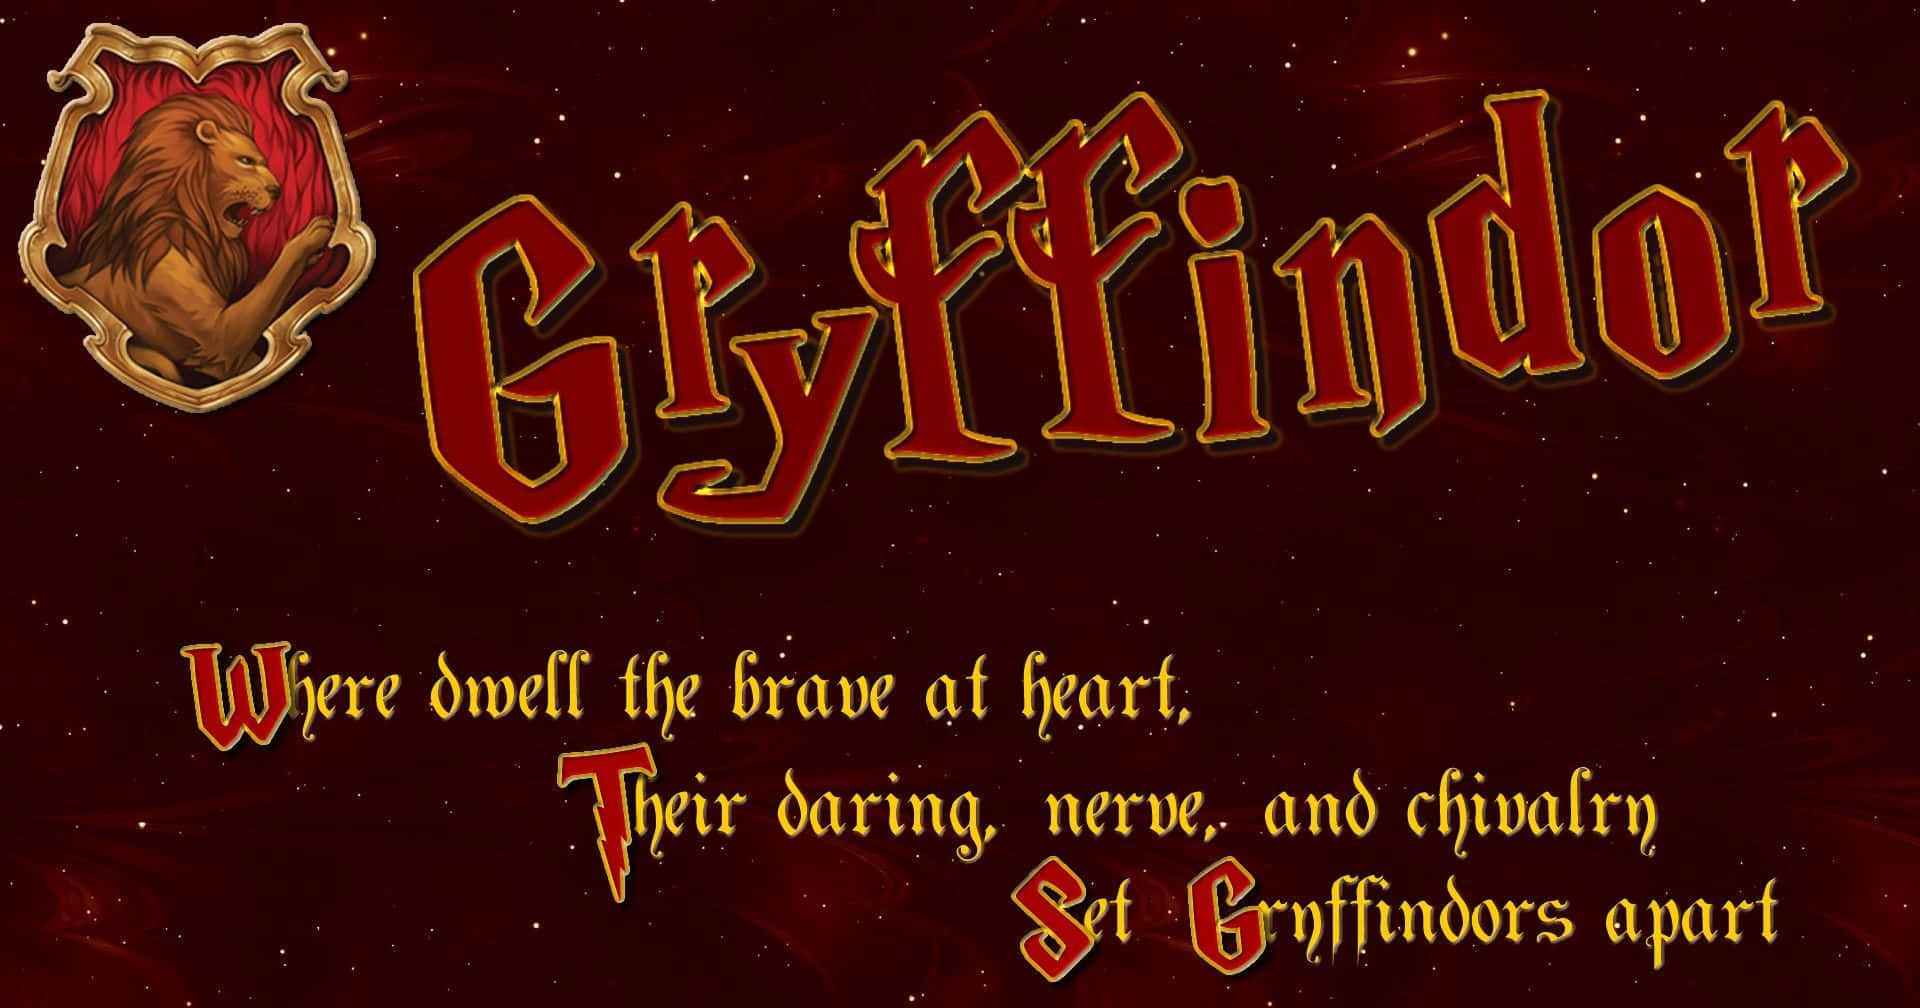 Join Gryffindor - Home of Courageous and Daring People Wallpaper